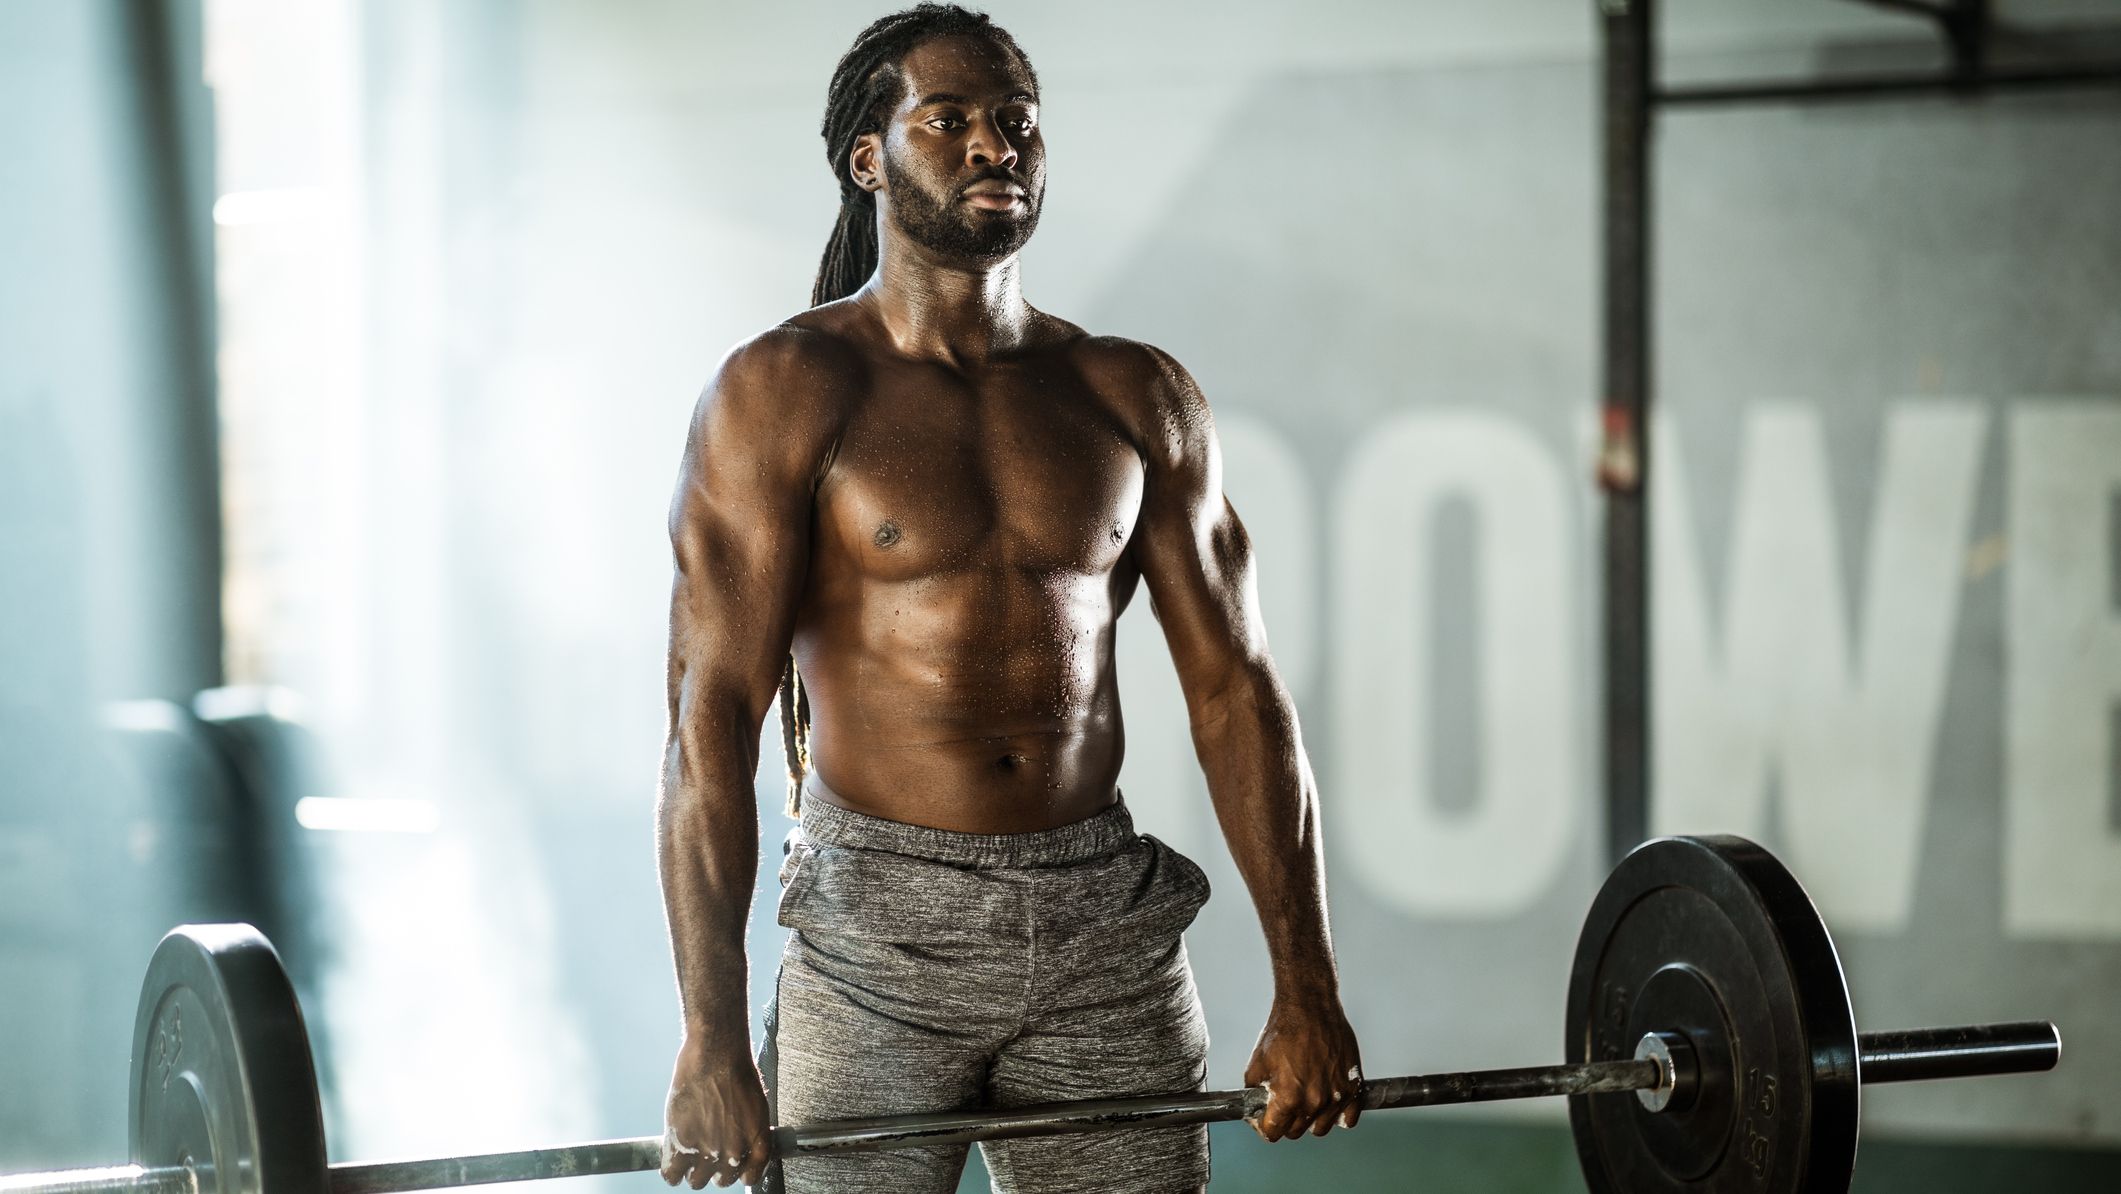 How to Build Muscle: Workout and Diet Tips, Per Experts